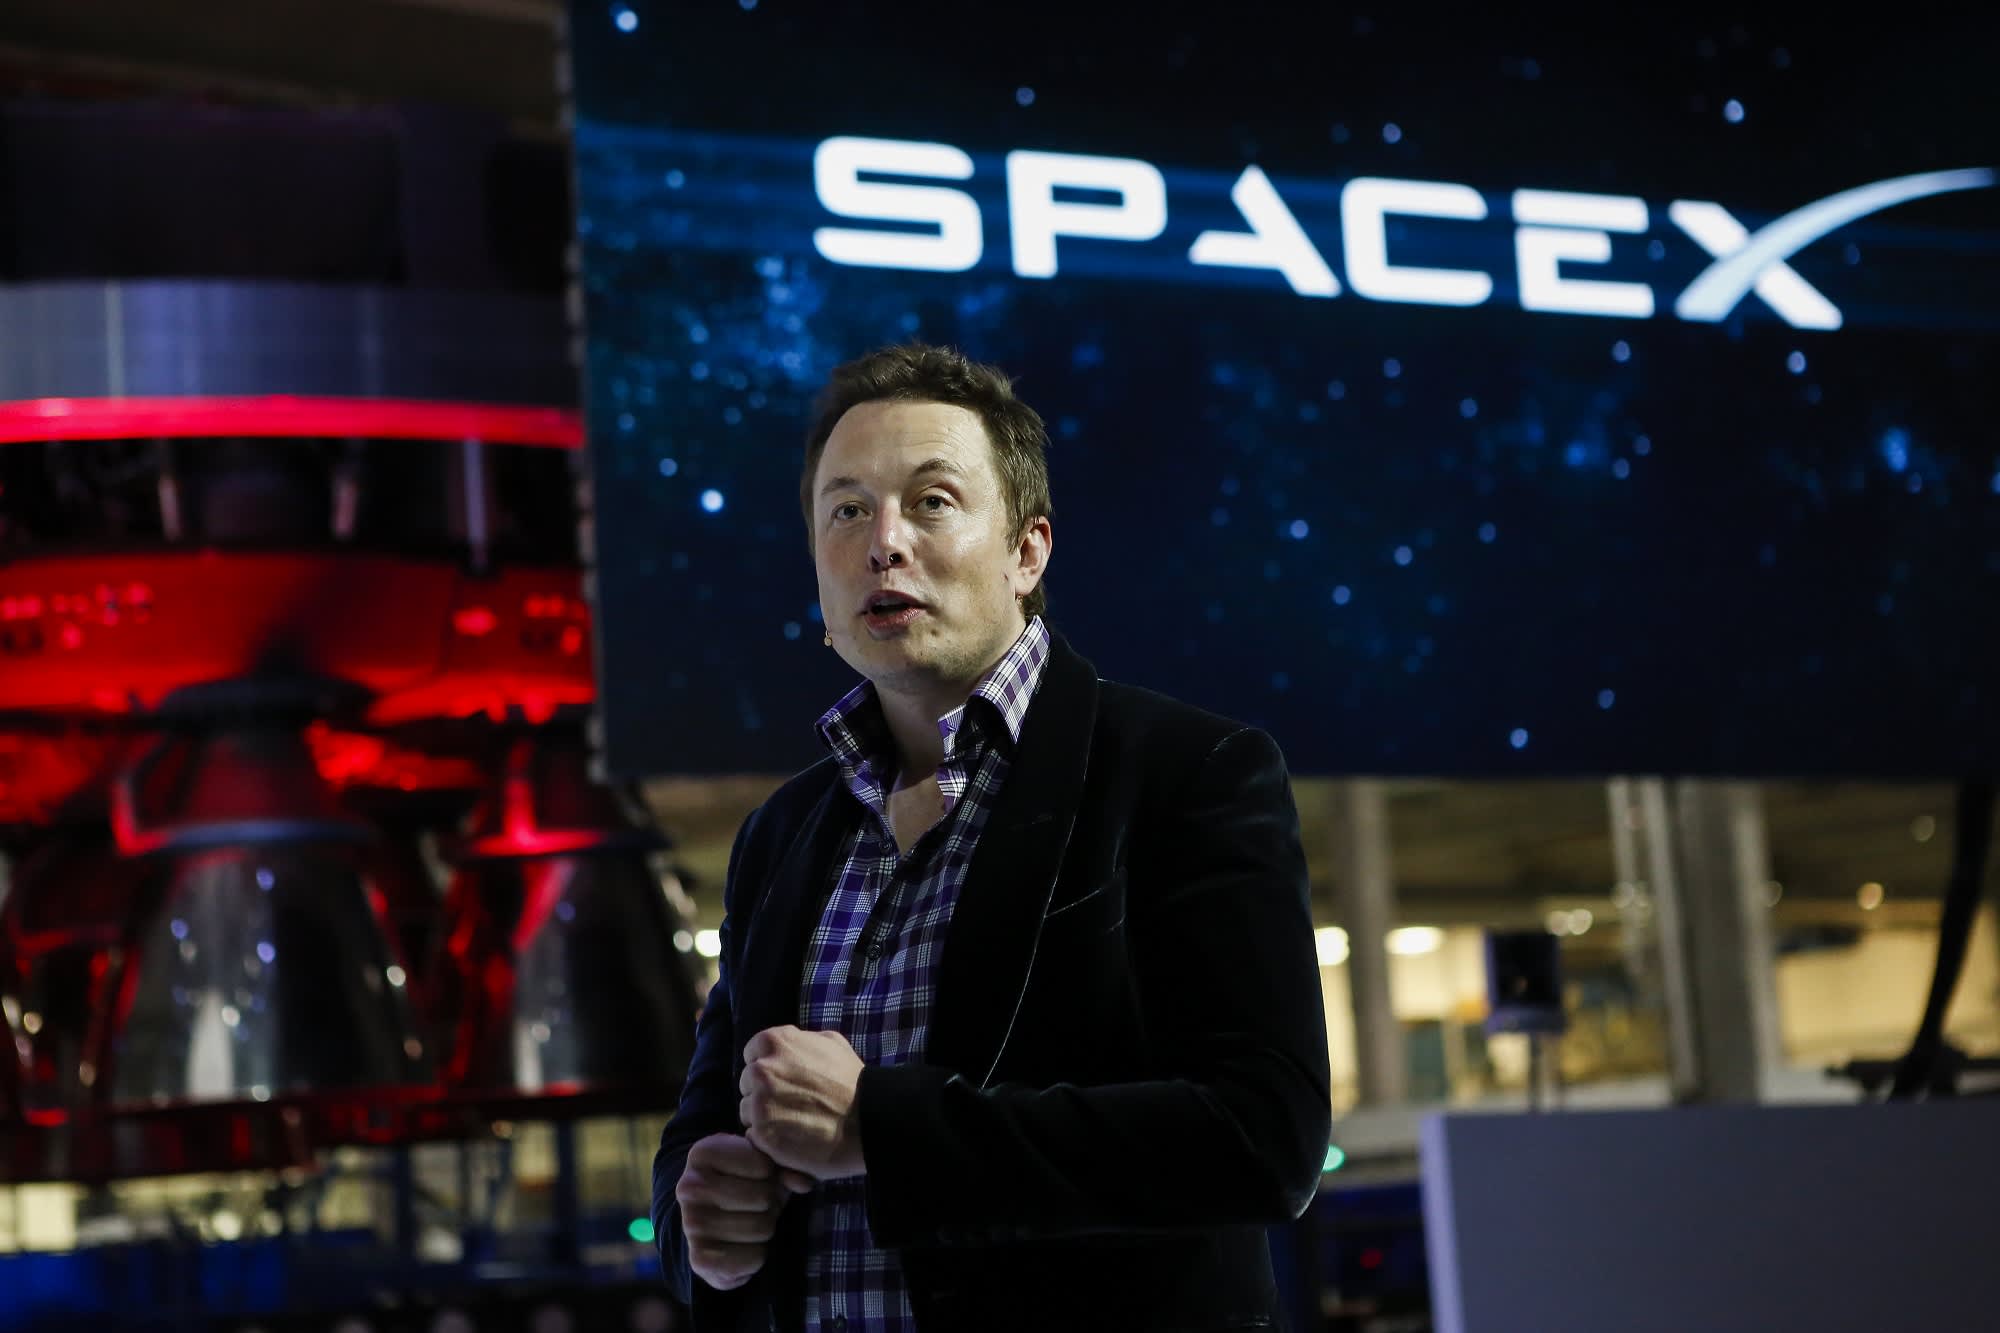 Elon Musk's SpaceX has begun large-scale Starlink testing in the UK